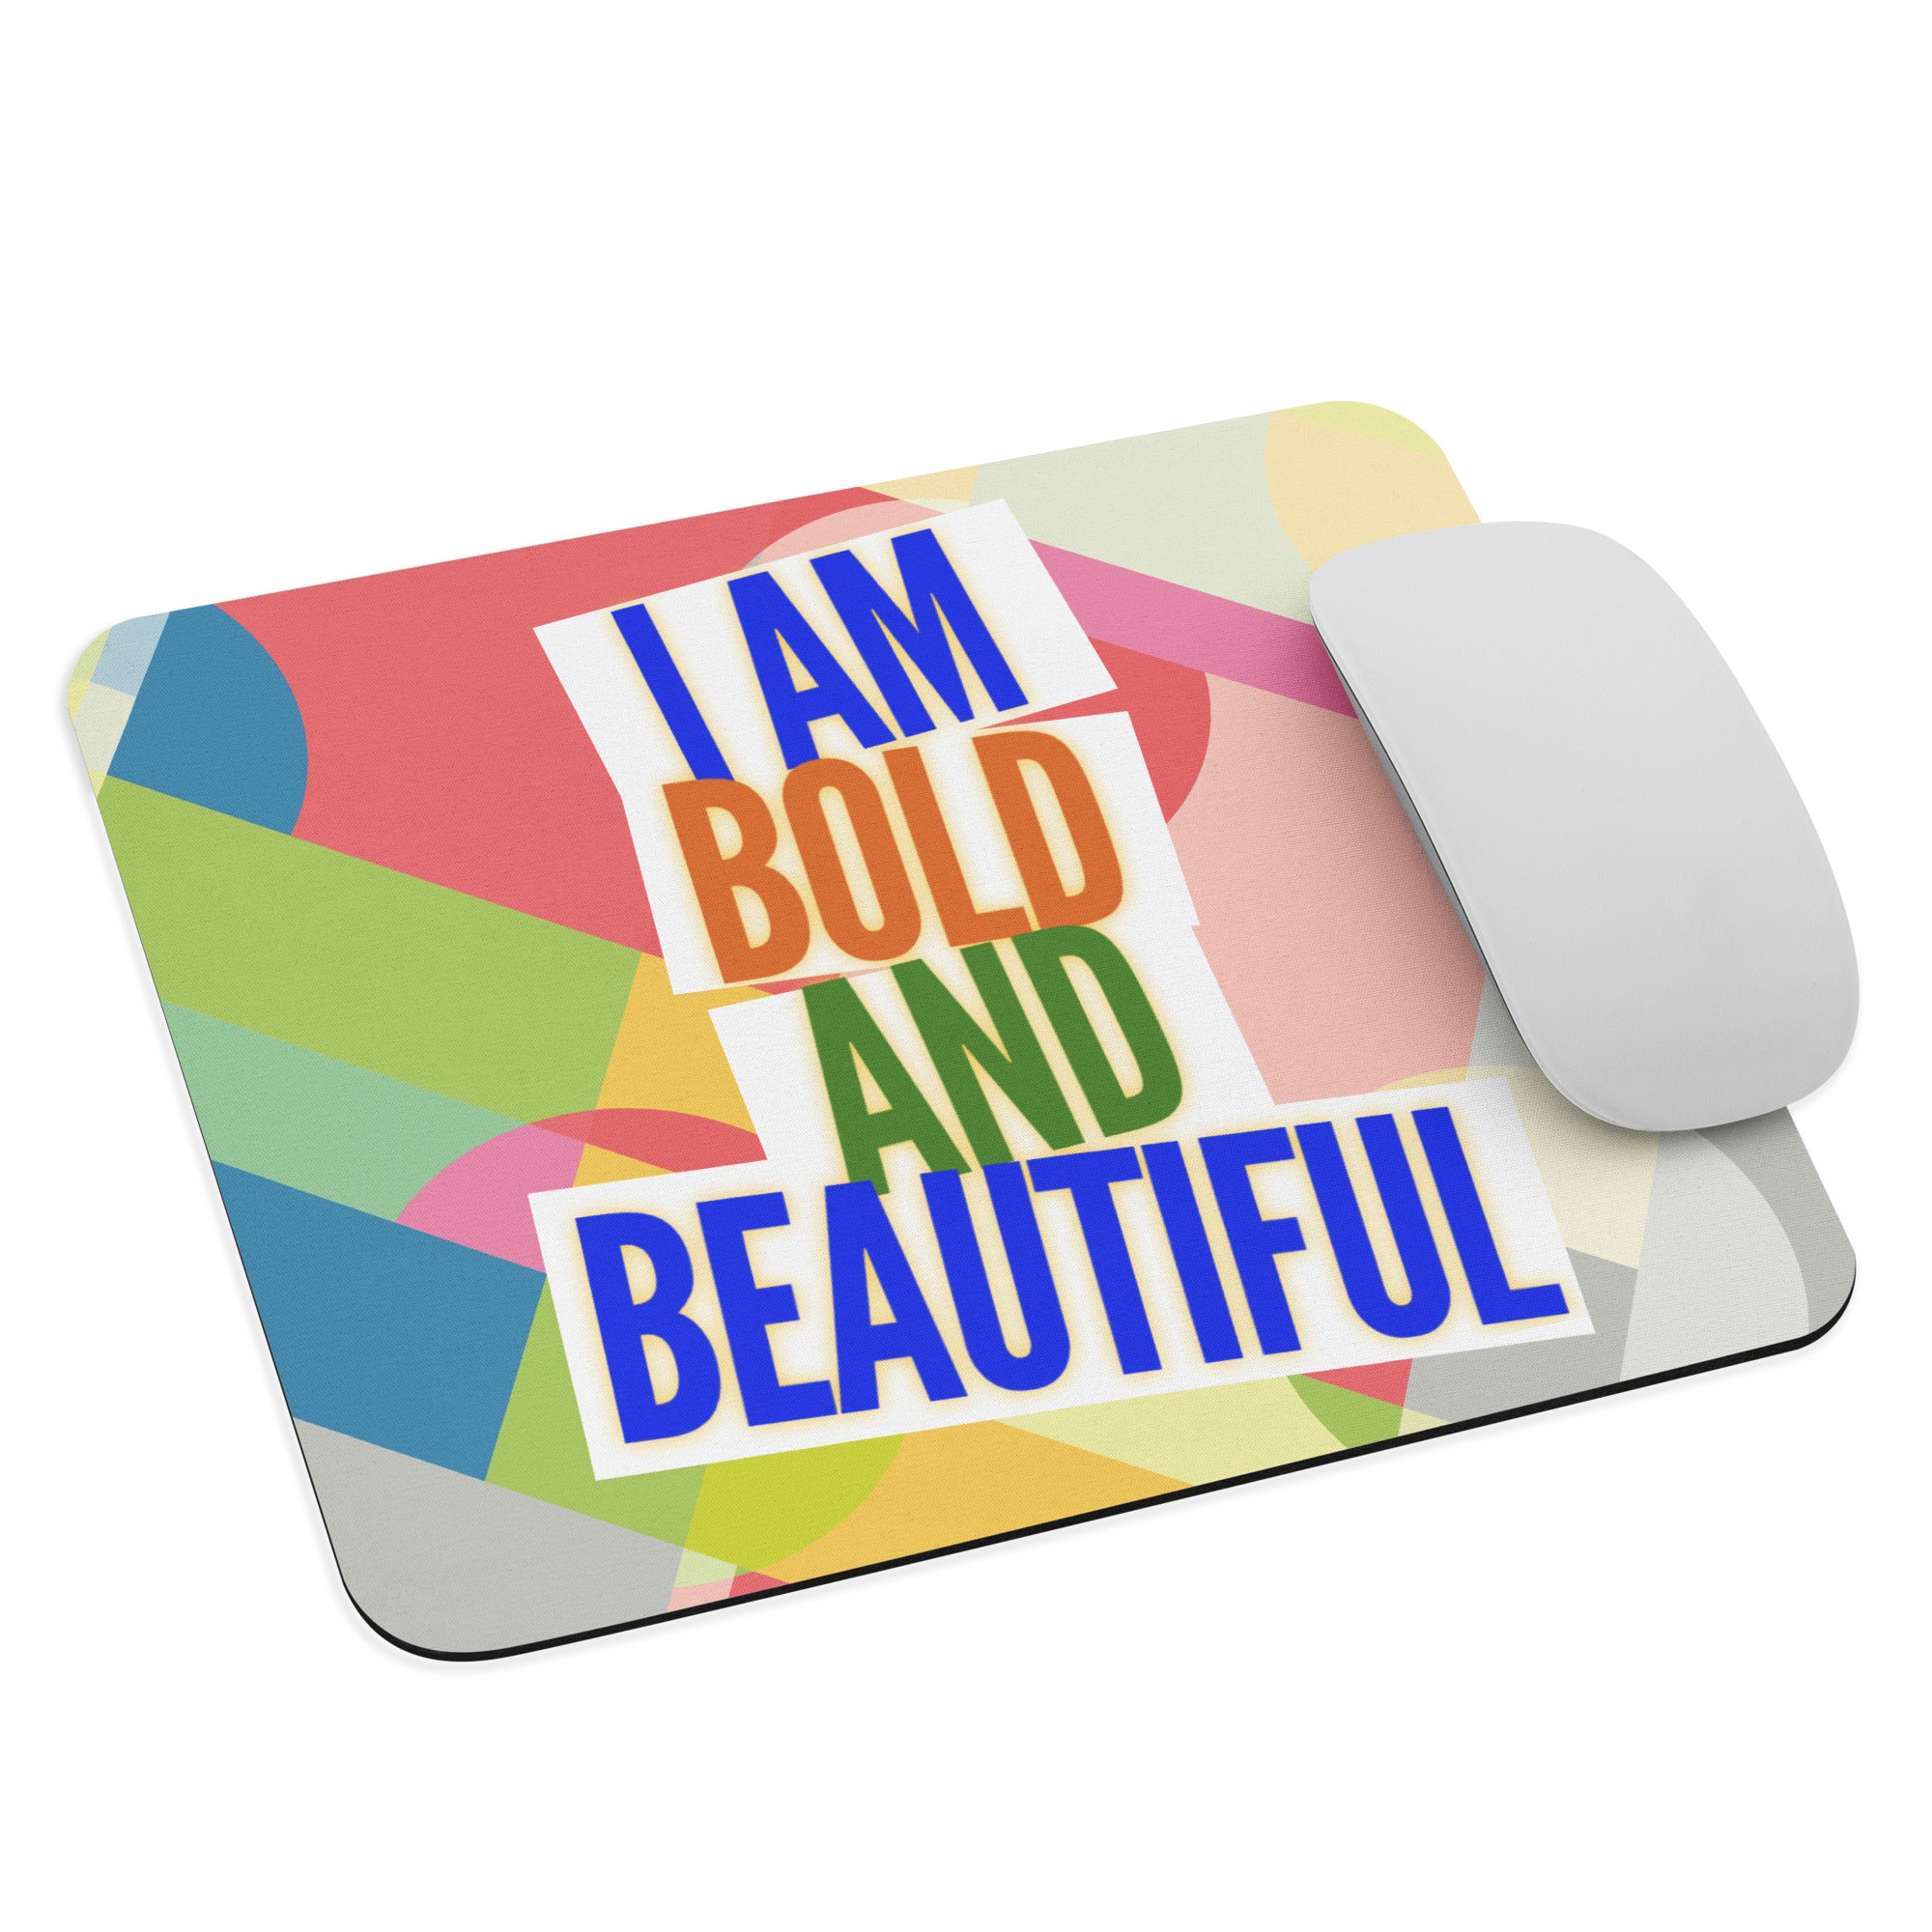 GloWell Designs - Mouse Pad - Affirmation Quote - I Am Bold & Beautiful - GloWell Designs